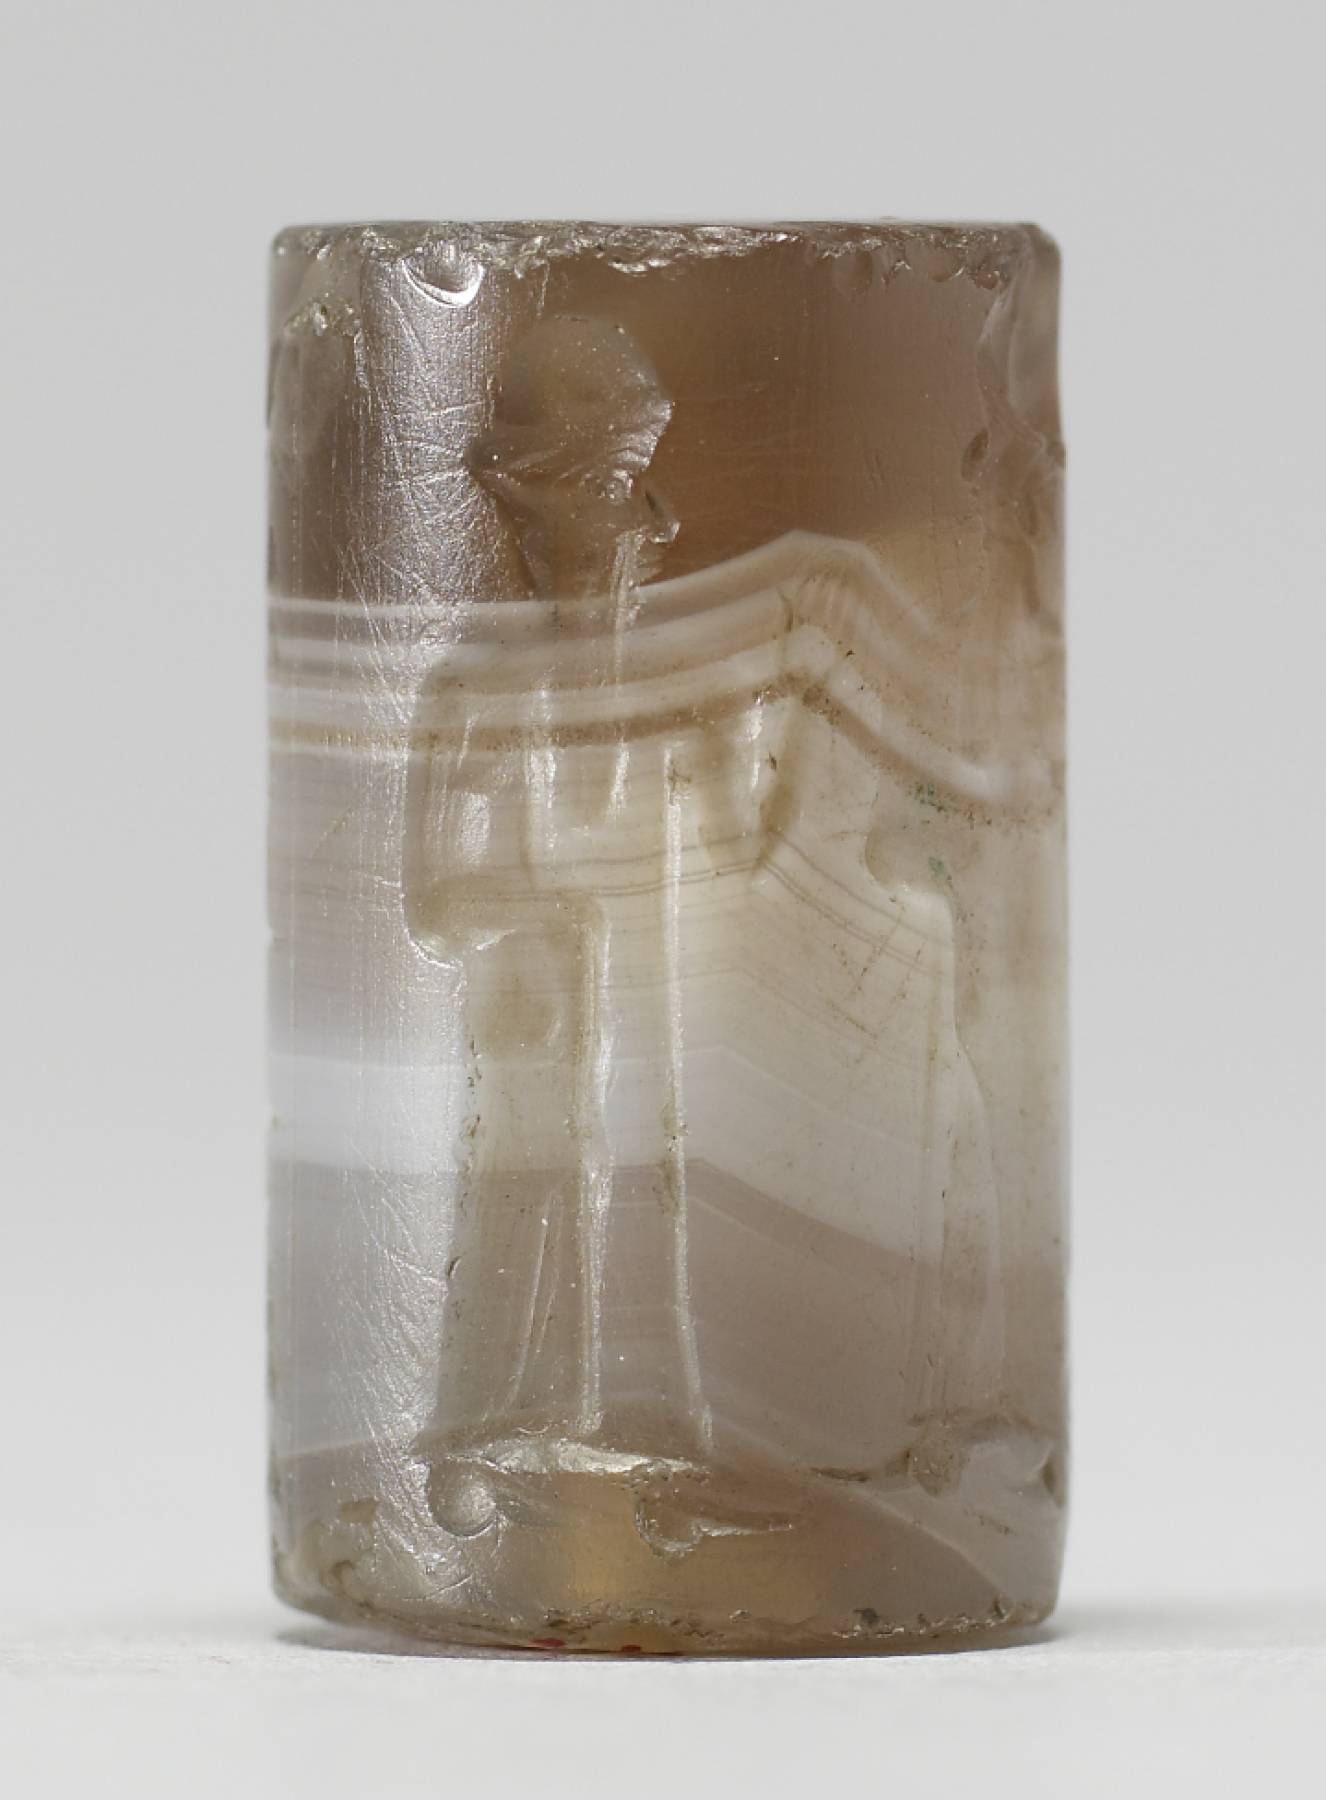 Image for Cylinder Seal with Deities and an Inscription